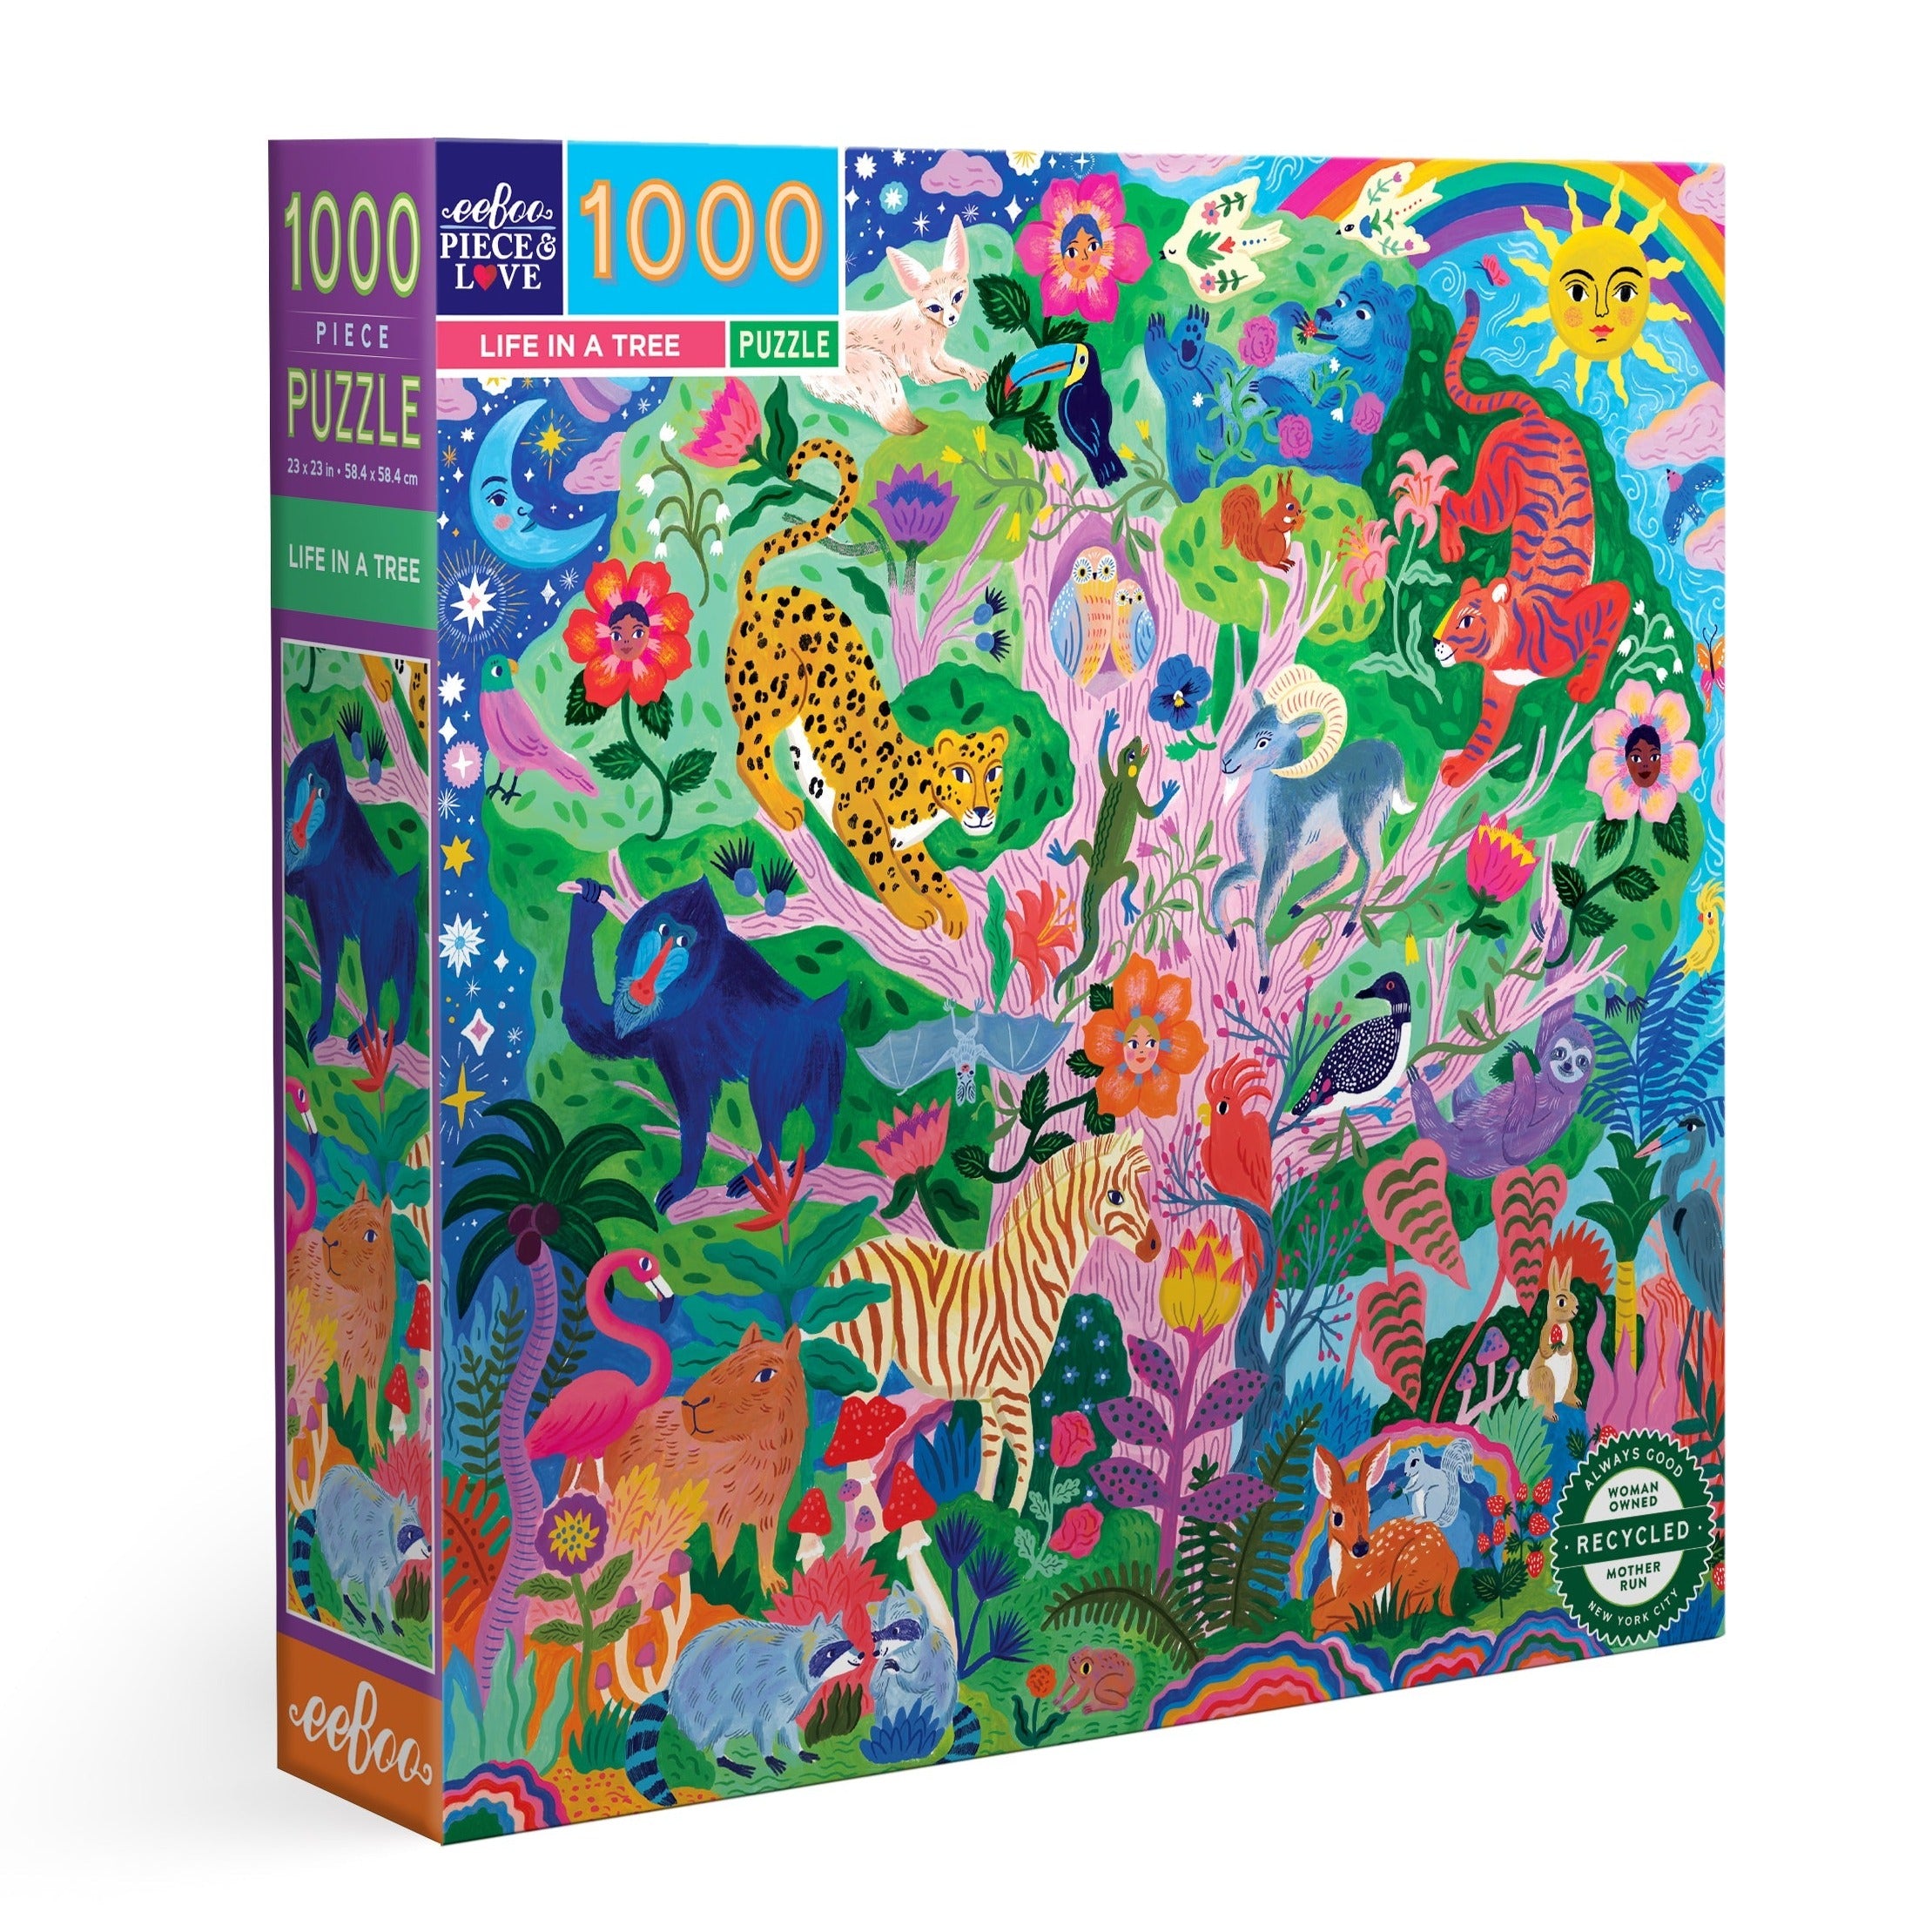 New eeBoo Jigsaw Puzzles, Games, Sketchbooks and More | Unique Gifts